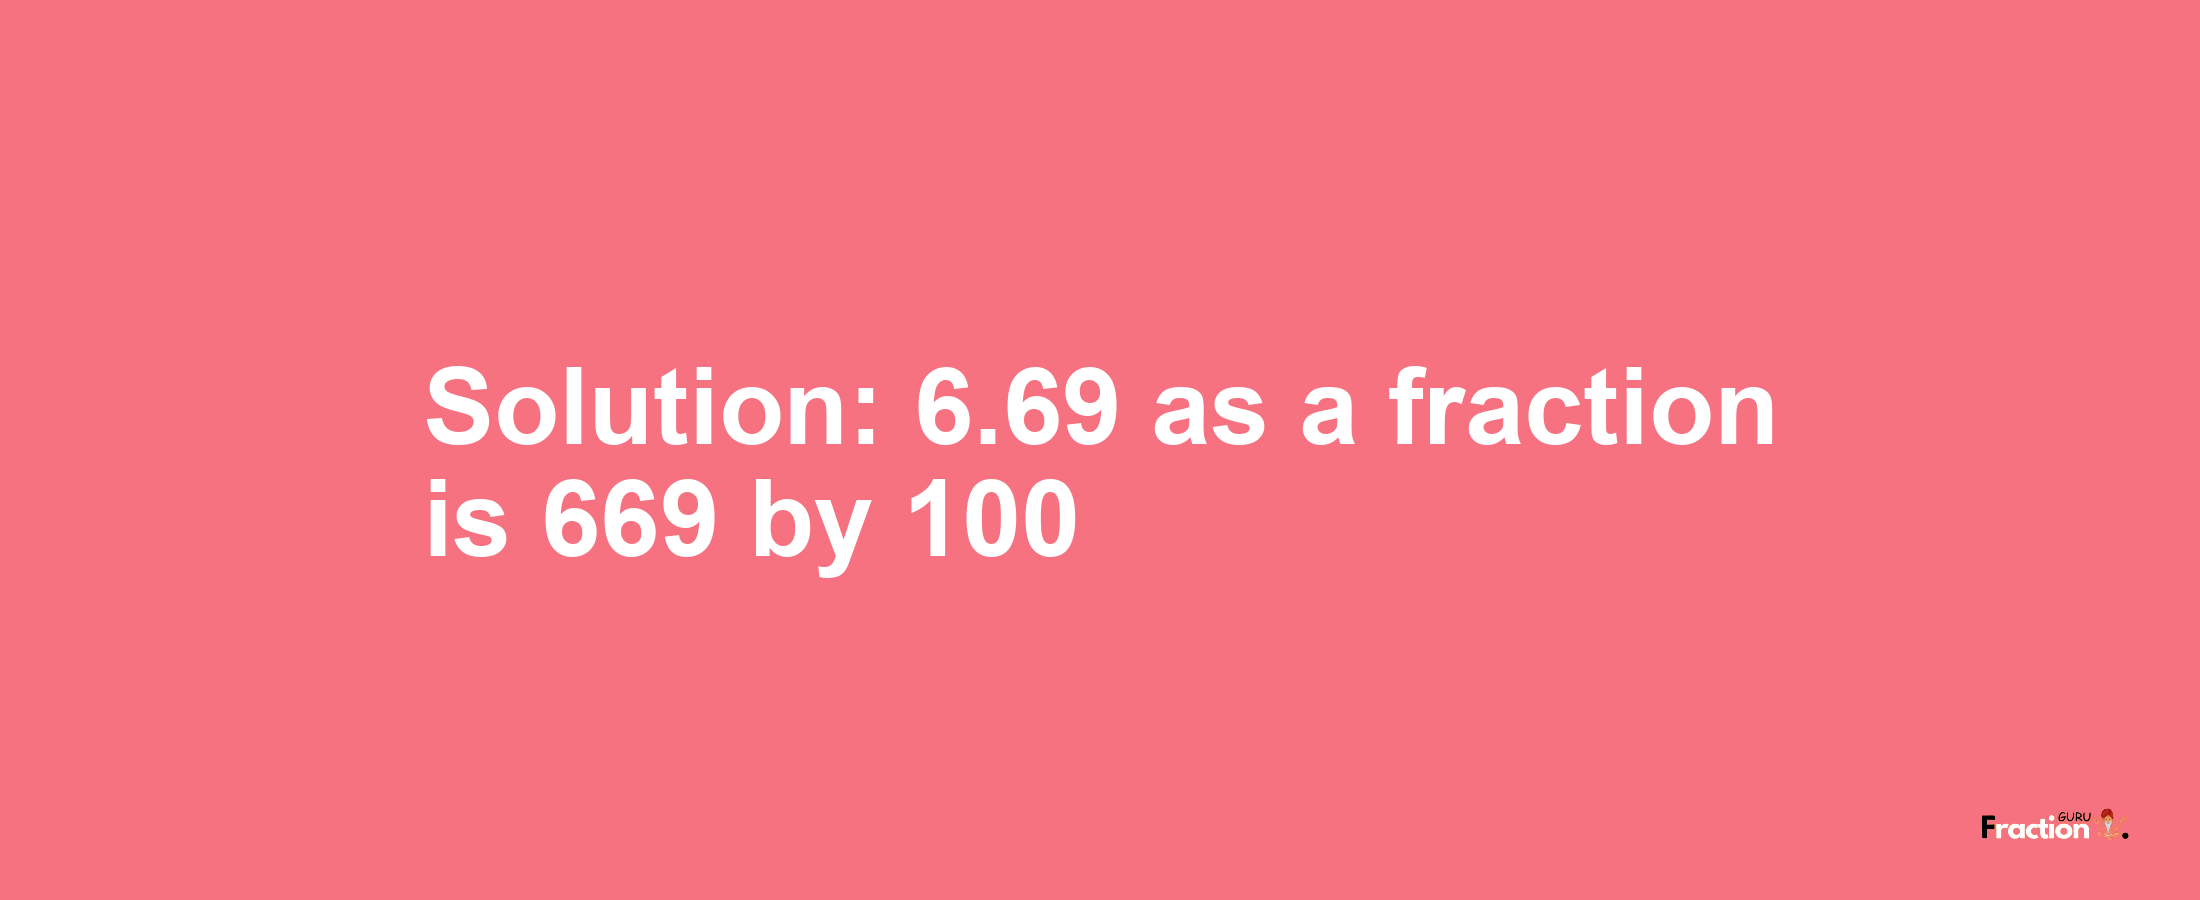 Solution:6.69 as a fraction is 669/100